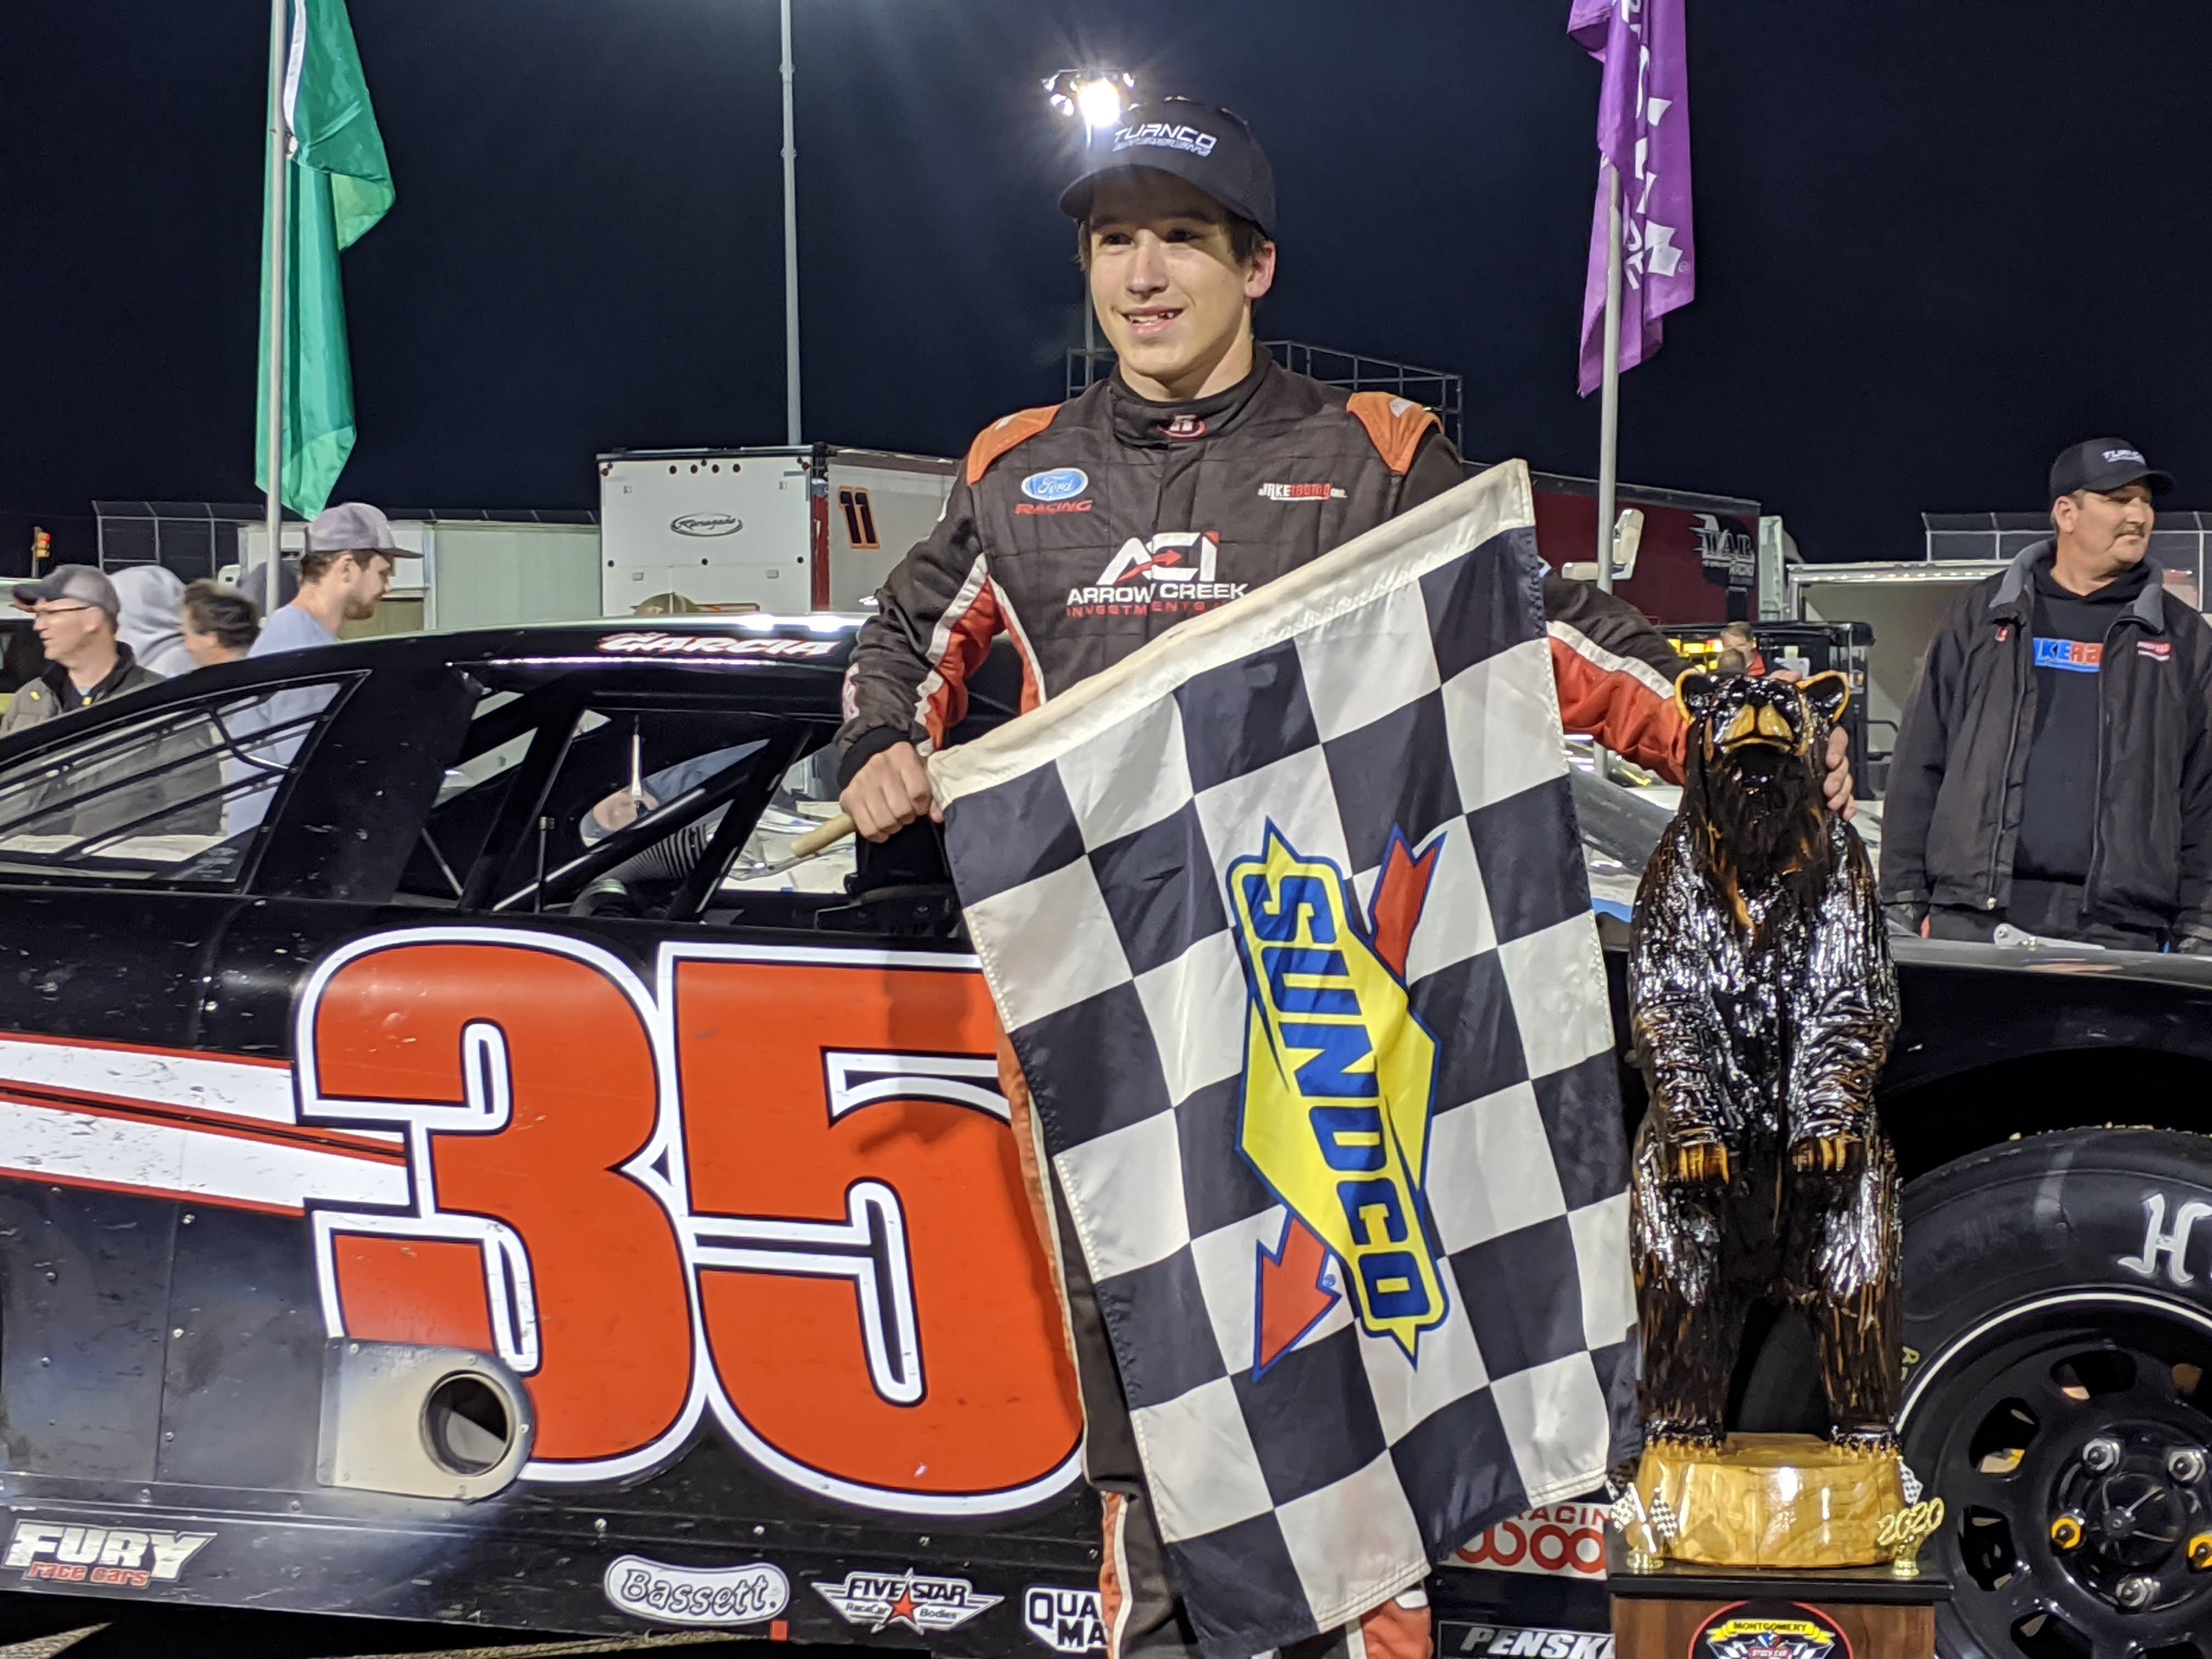 Jake Garcia Leads Crop of Fresh Faces at the Front of Alabama 200 with Breakout Victory